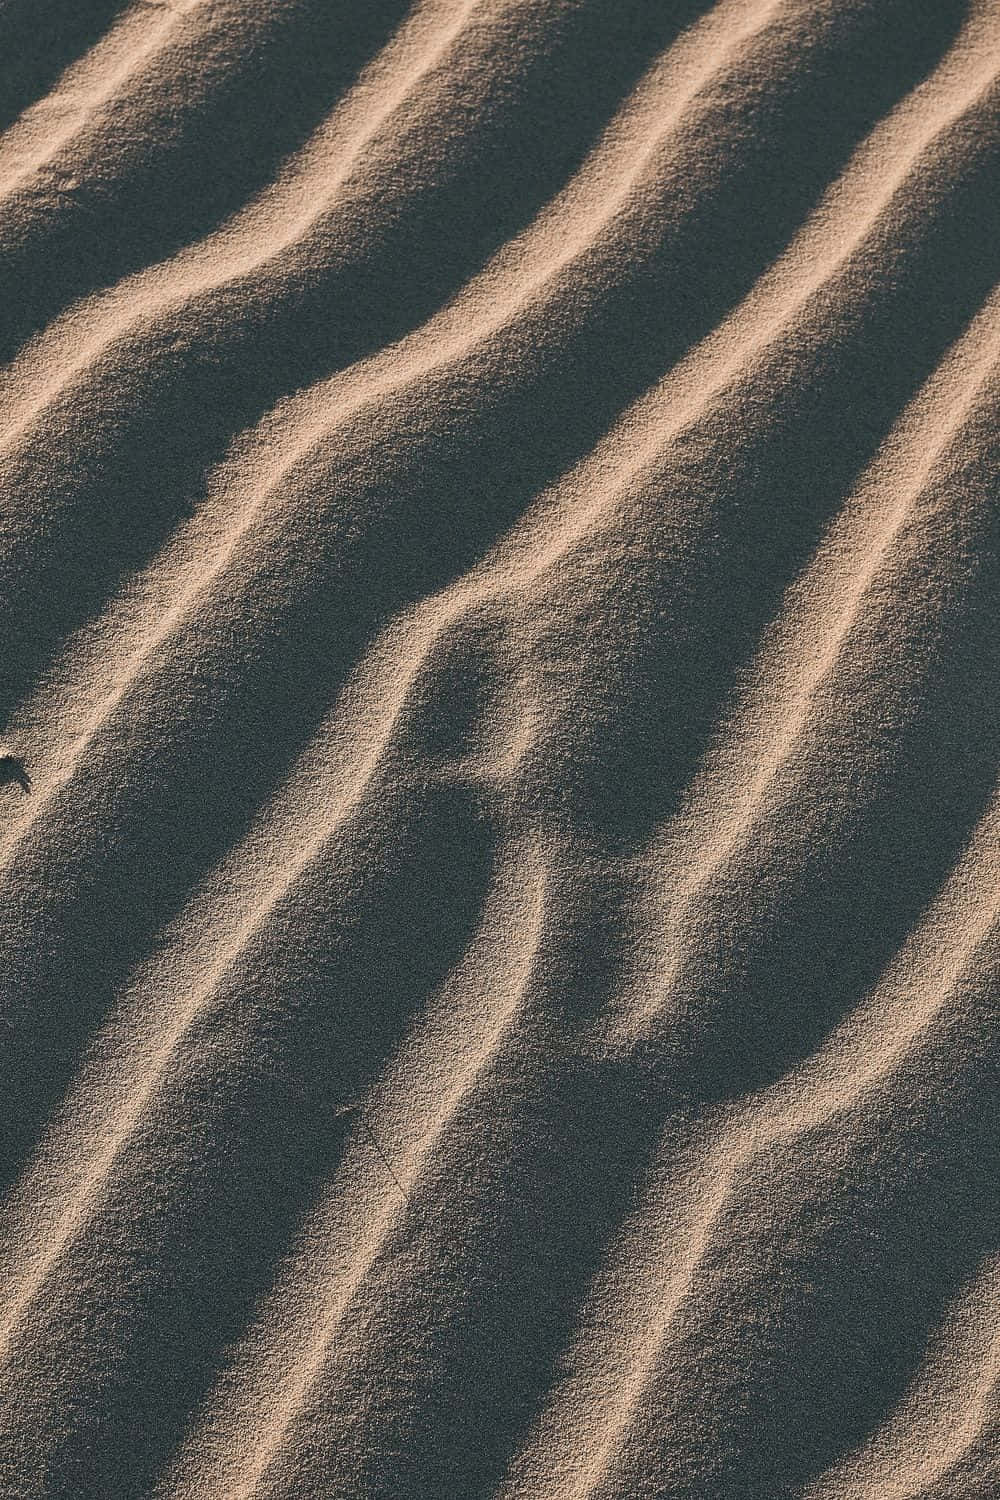 A Sand Dune With A Bird On It